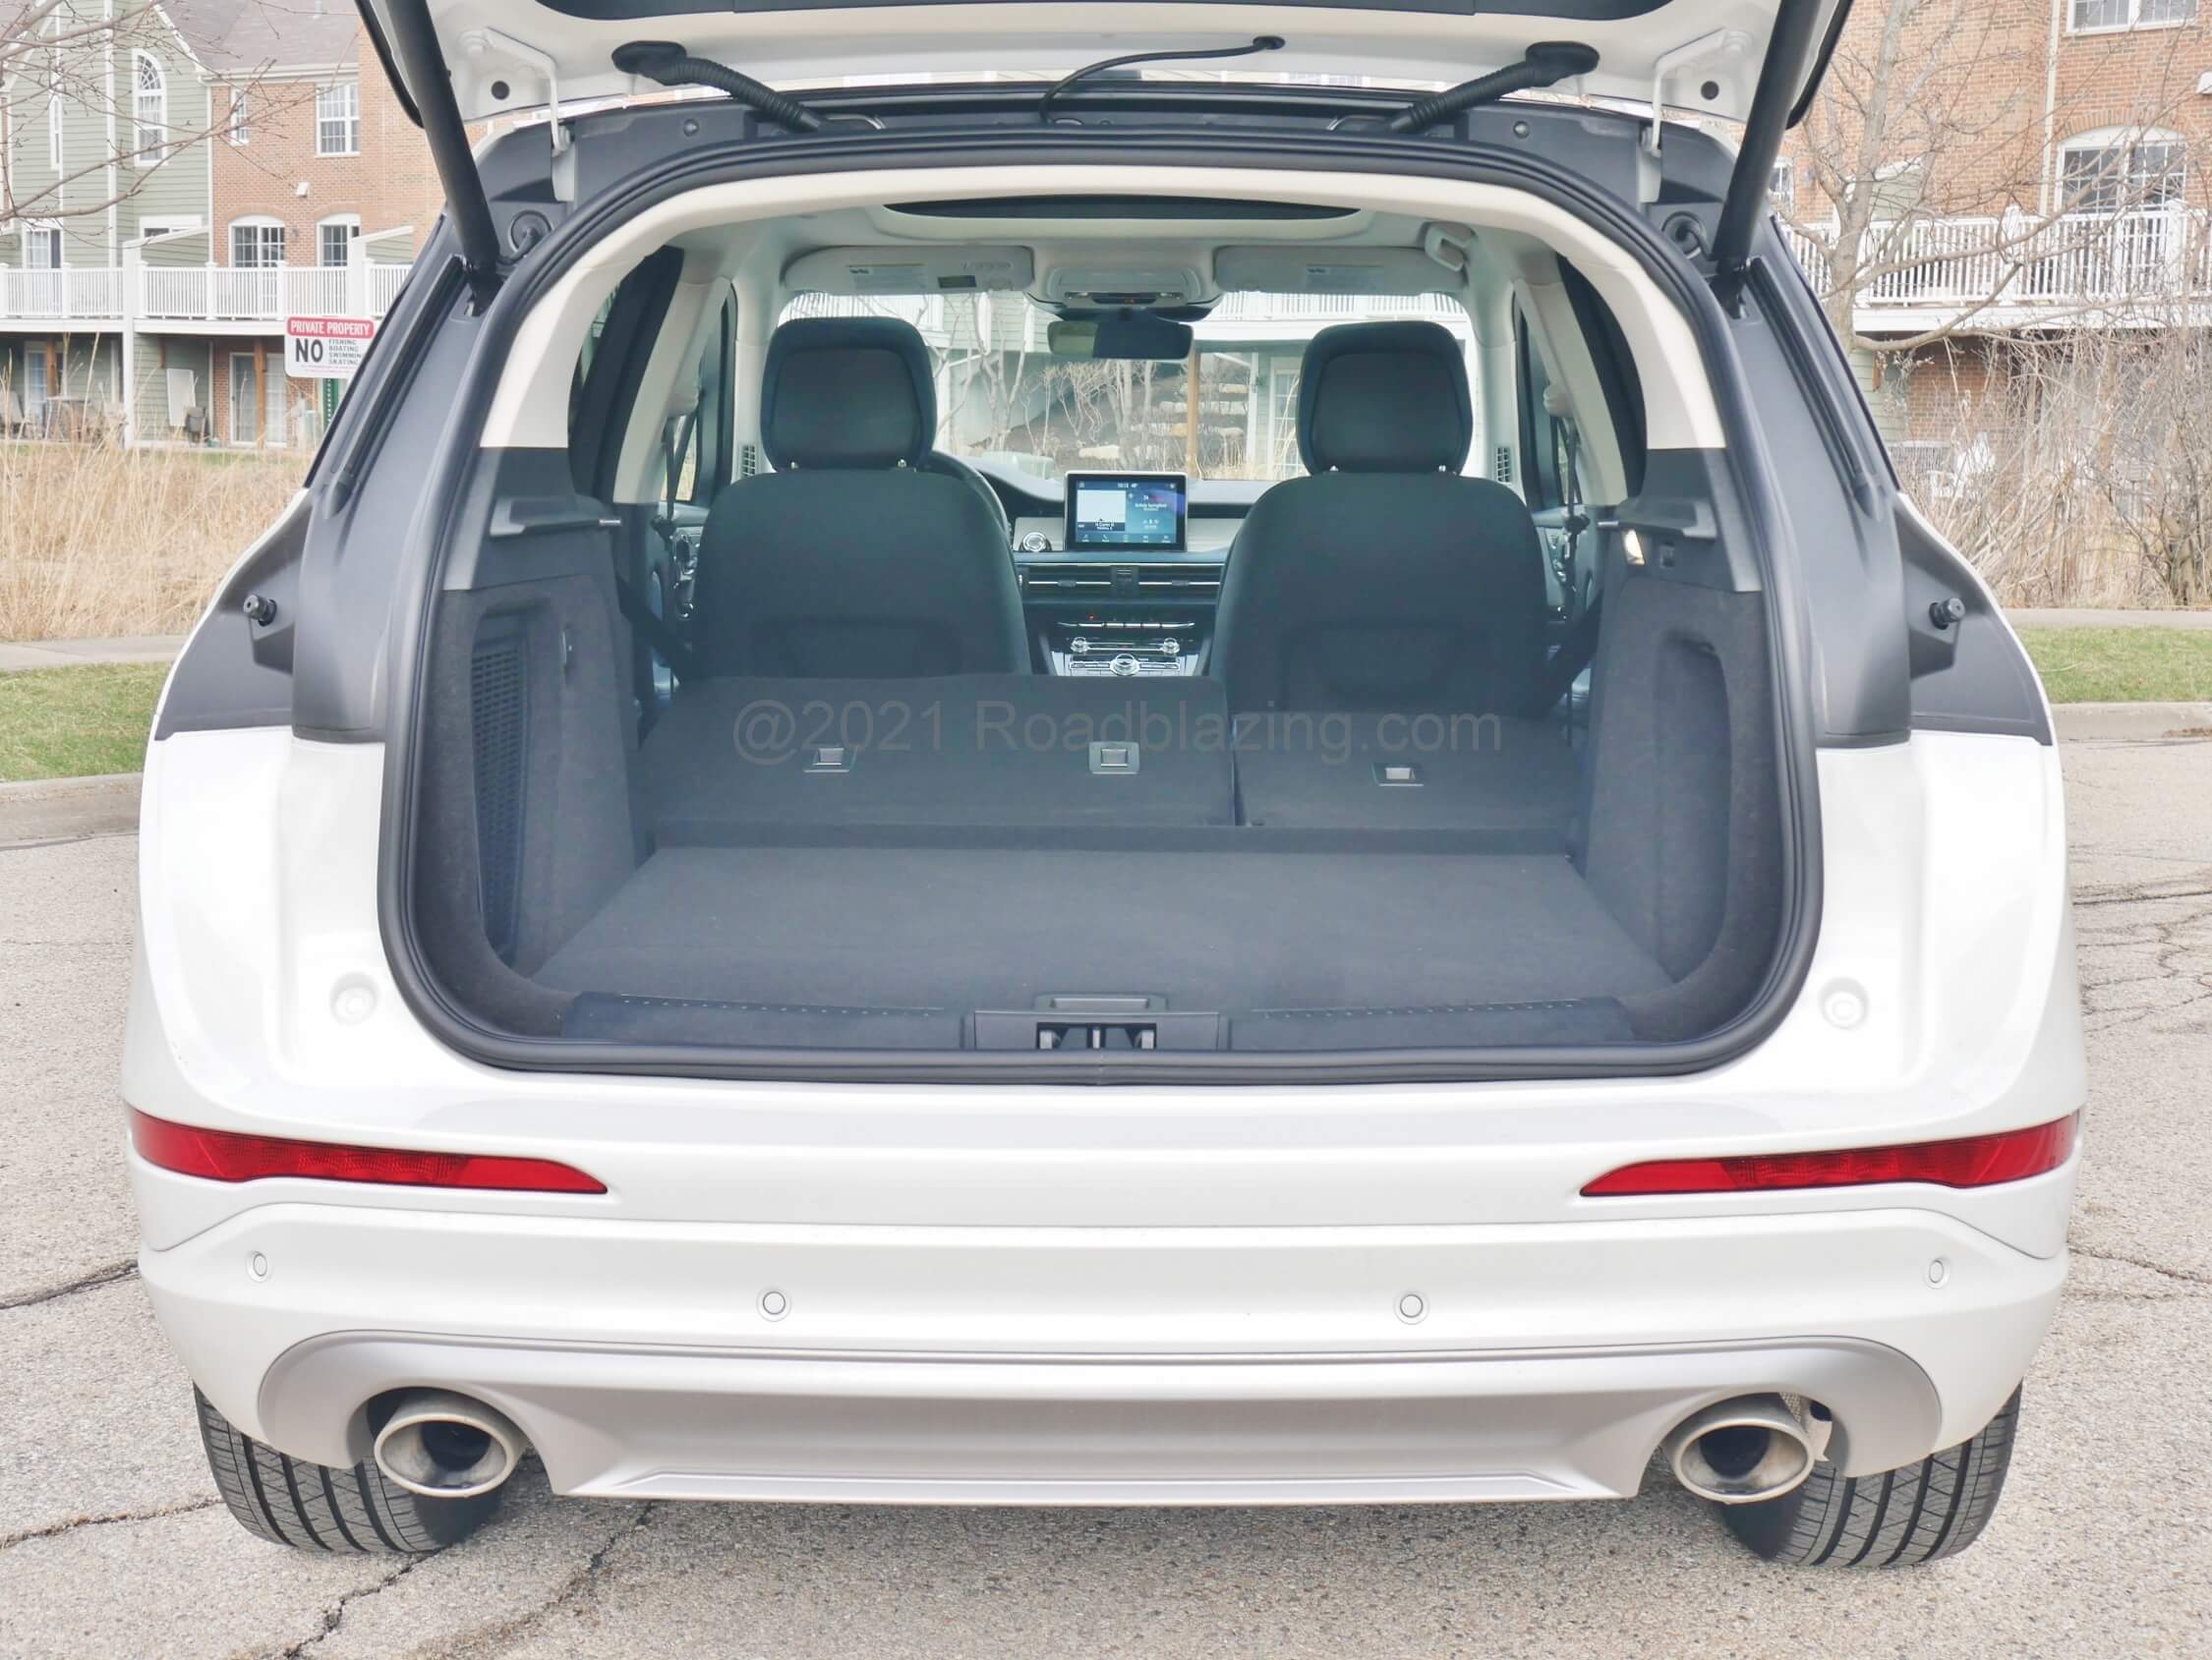 2021 Lincoln Corsair 2.3T AWD Reserve: Low load liftover, good width between wheel arches & near flat split folding 2nd accommodate large cargo for class